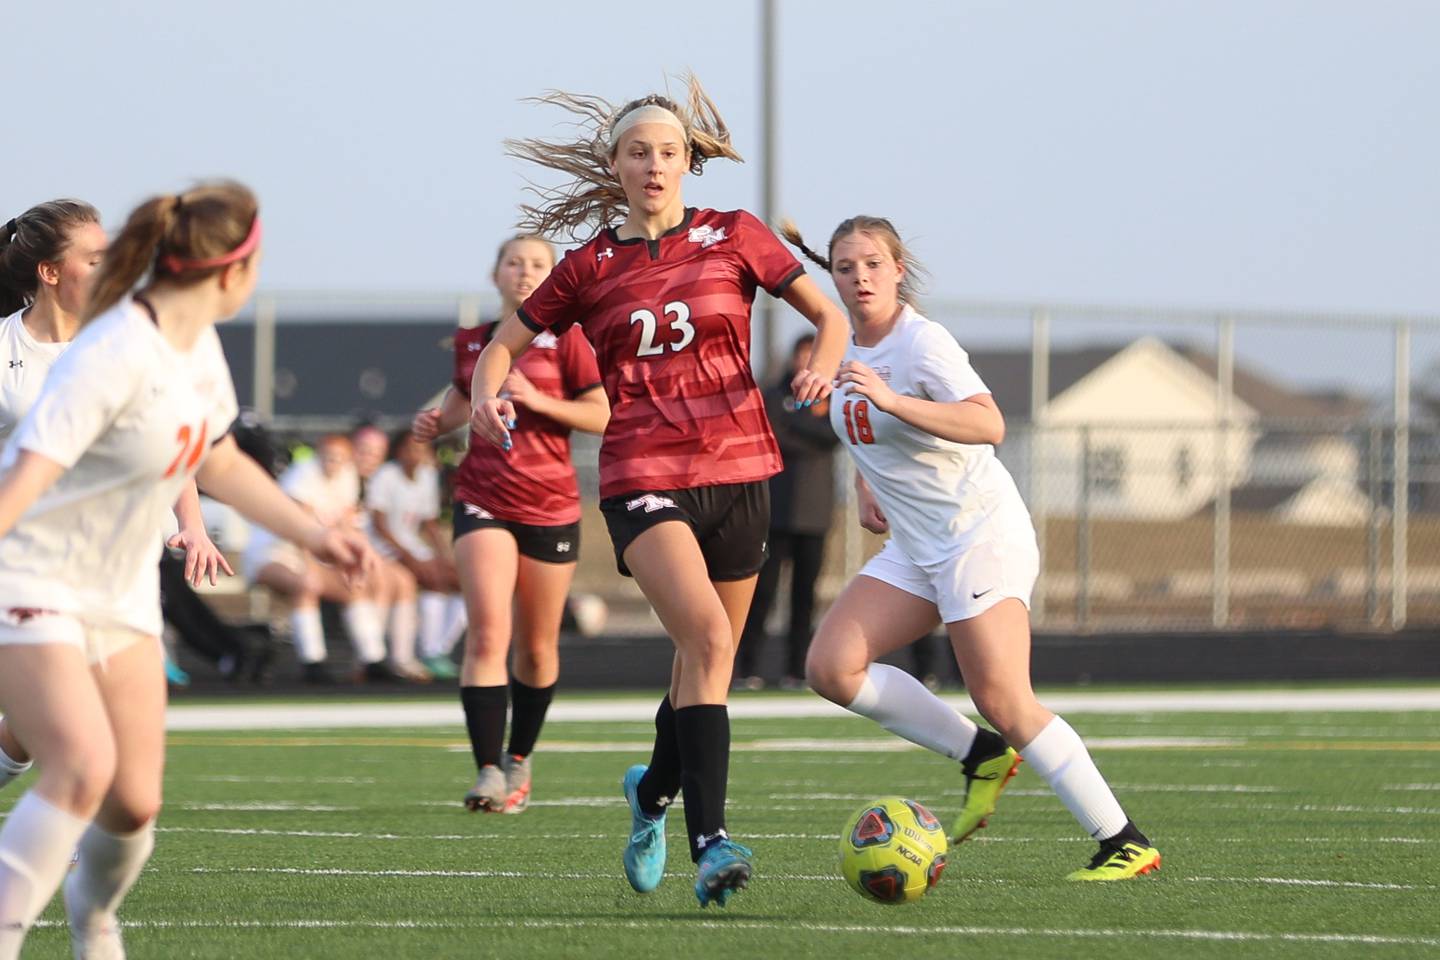 Plainfield North’s Tessa Fagerson passes the ball against Minooka. Monday, Mar. 14, 2022, in Plainfield.